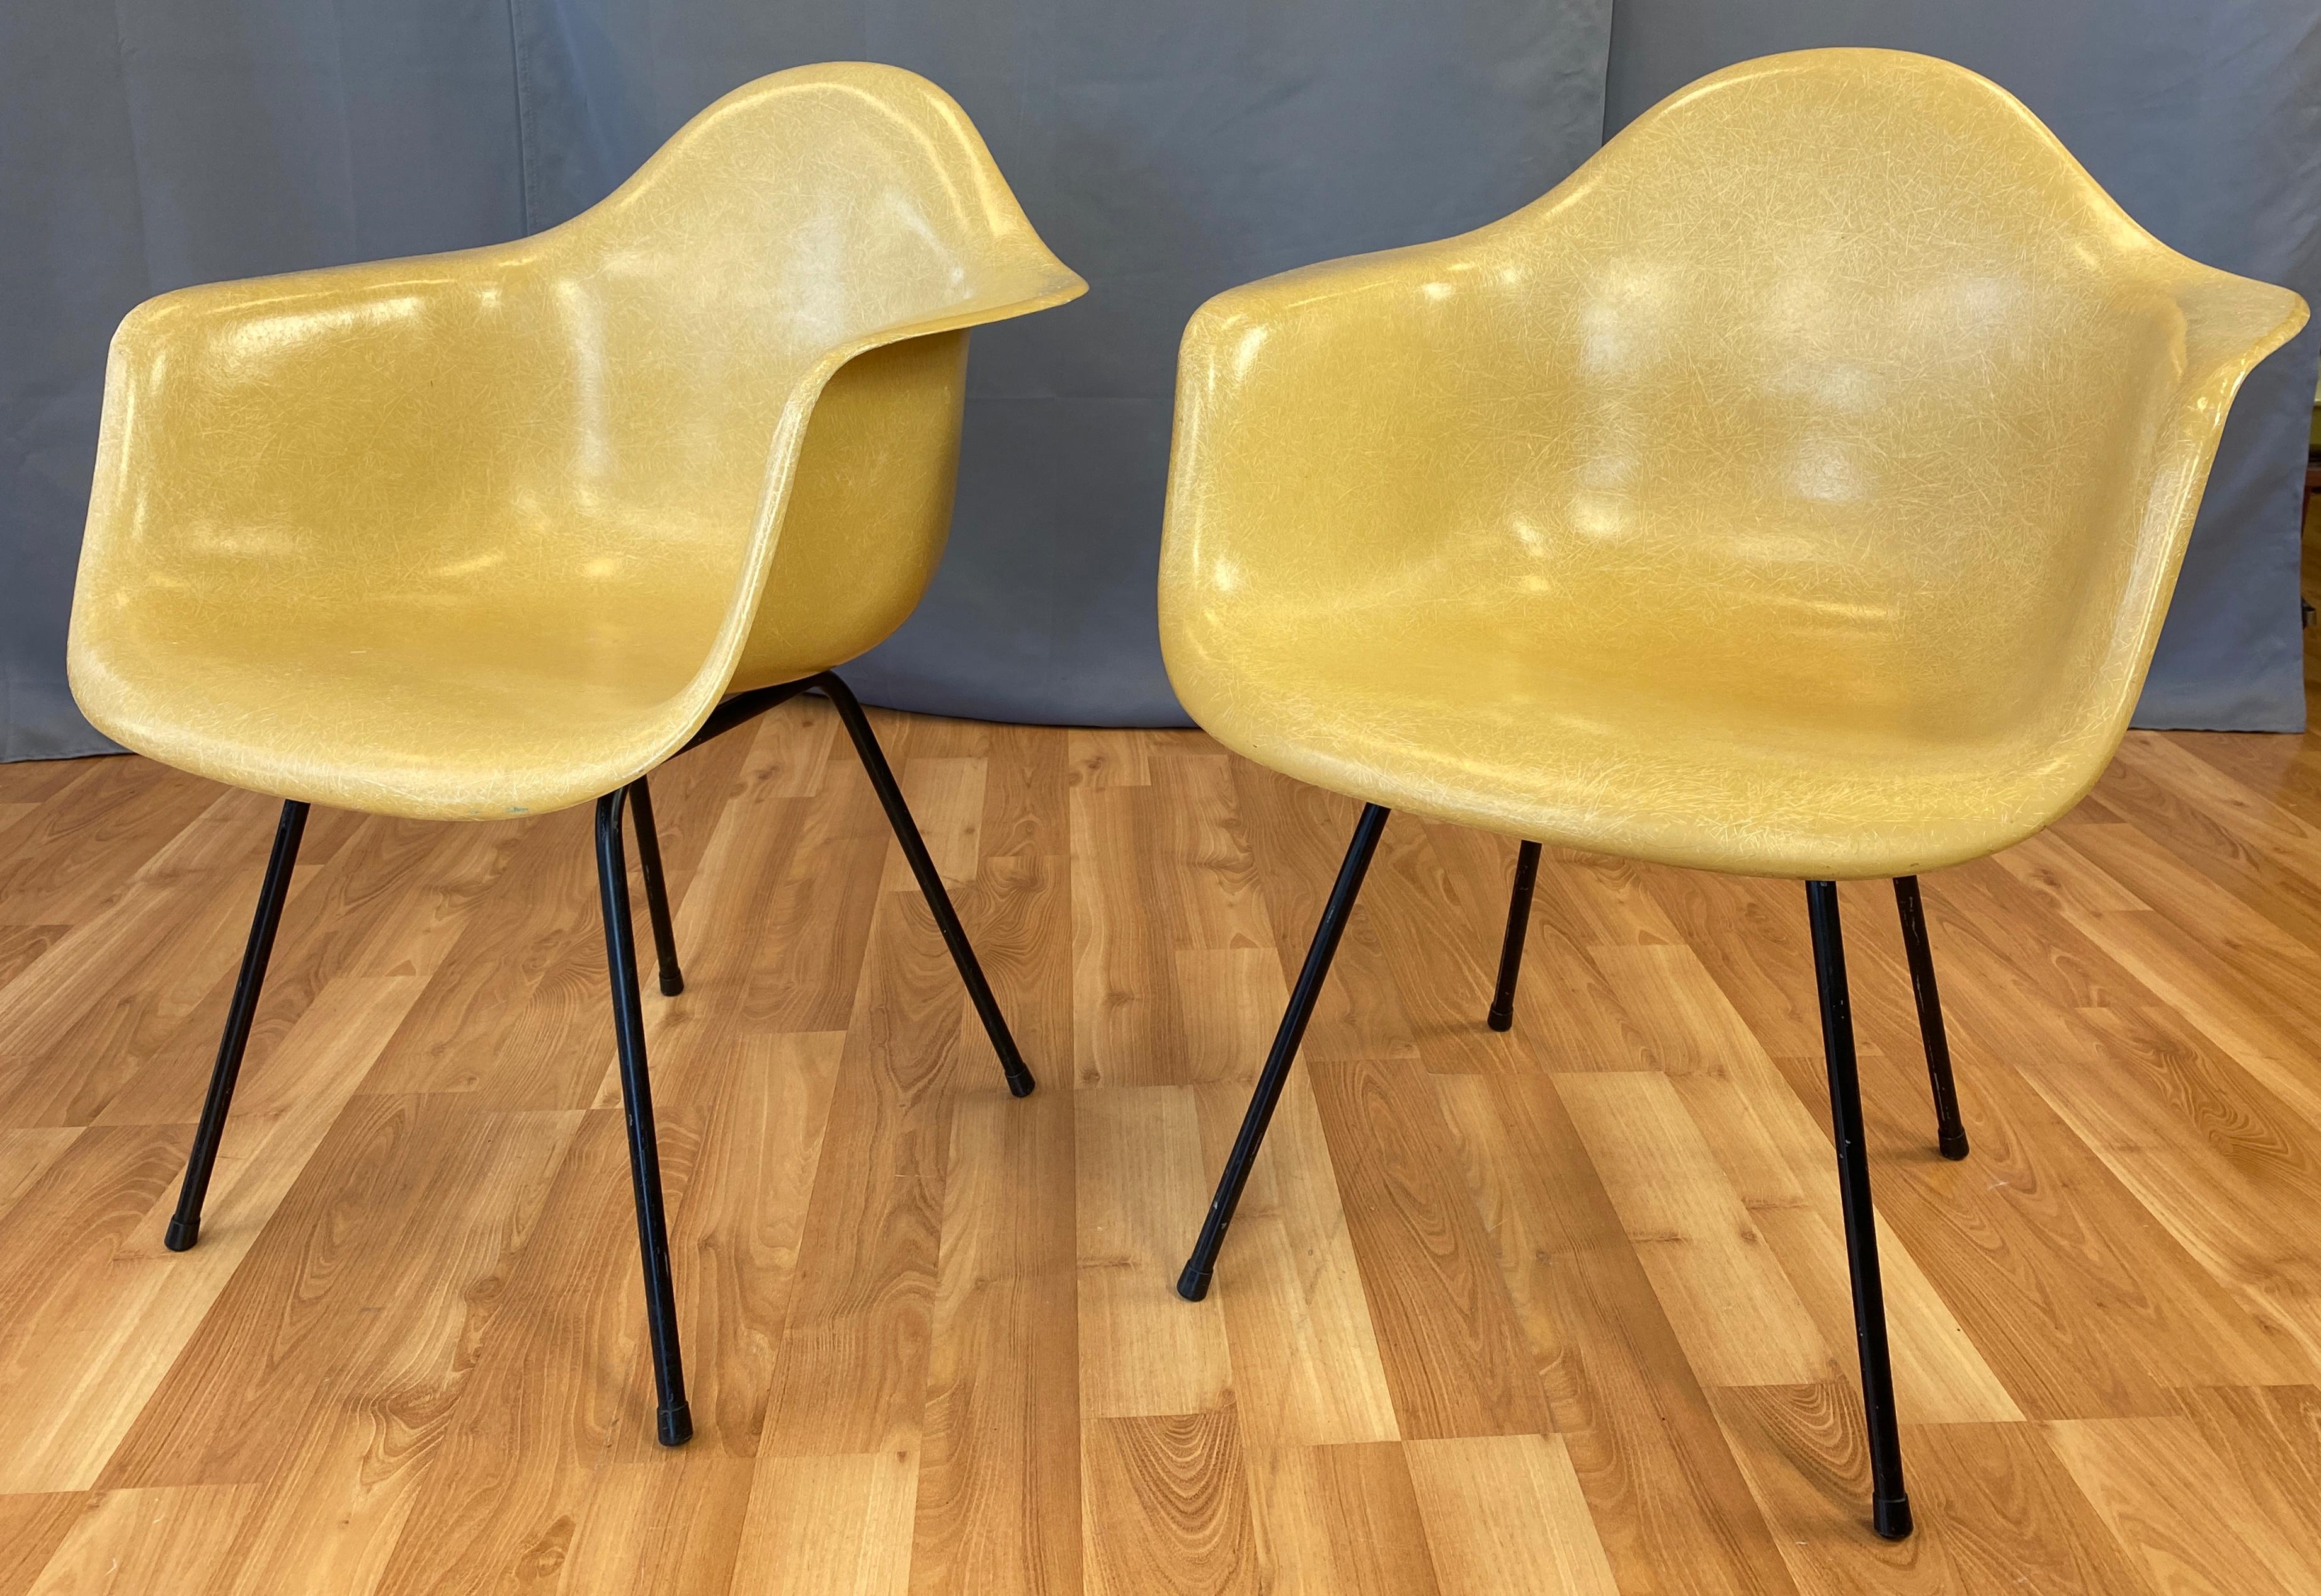 Offered here is a pair of circa 1960s Charles Eames designed fiberglass shell armchairs for Herman Miller.
They sit on black color bases, with the shells in what you could say is Dijon Mustard color.
Both have an 